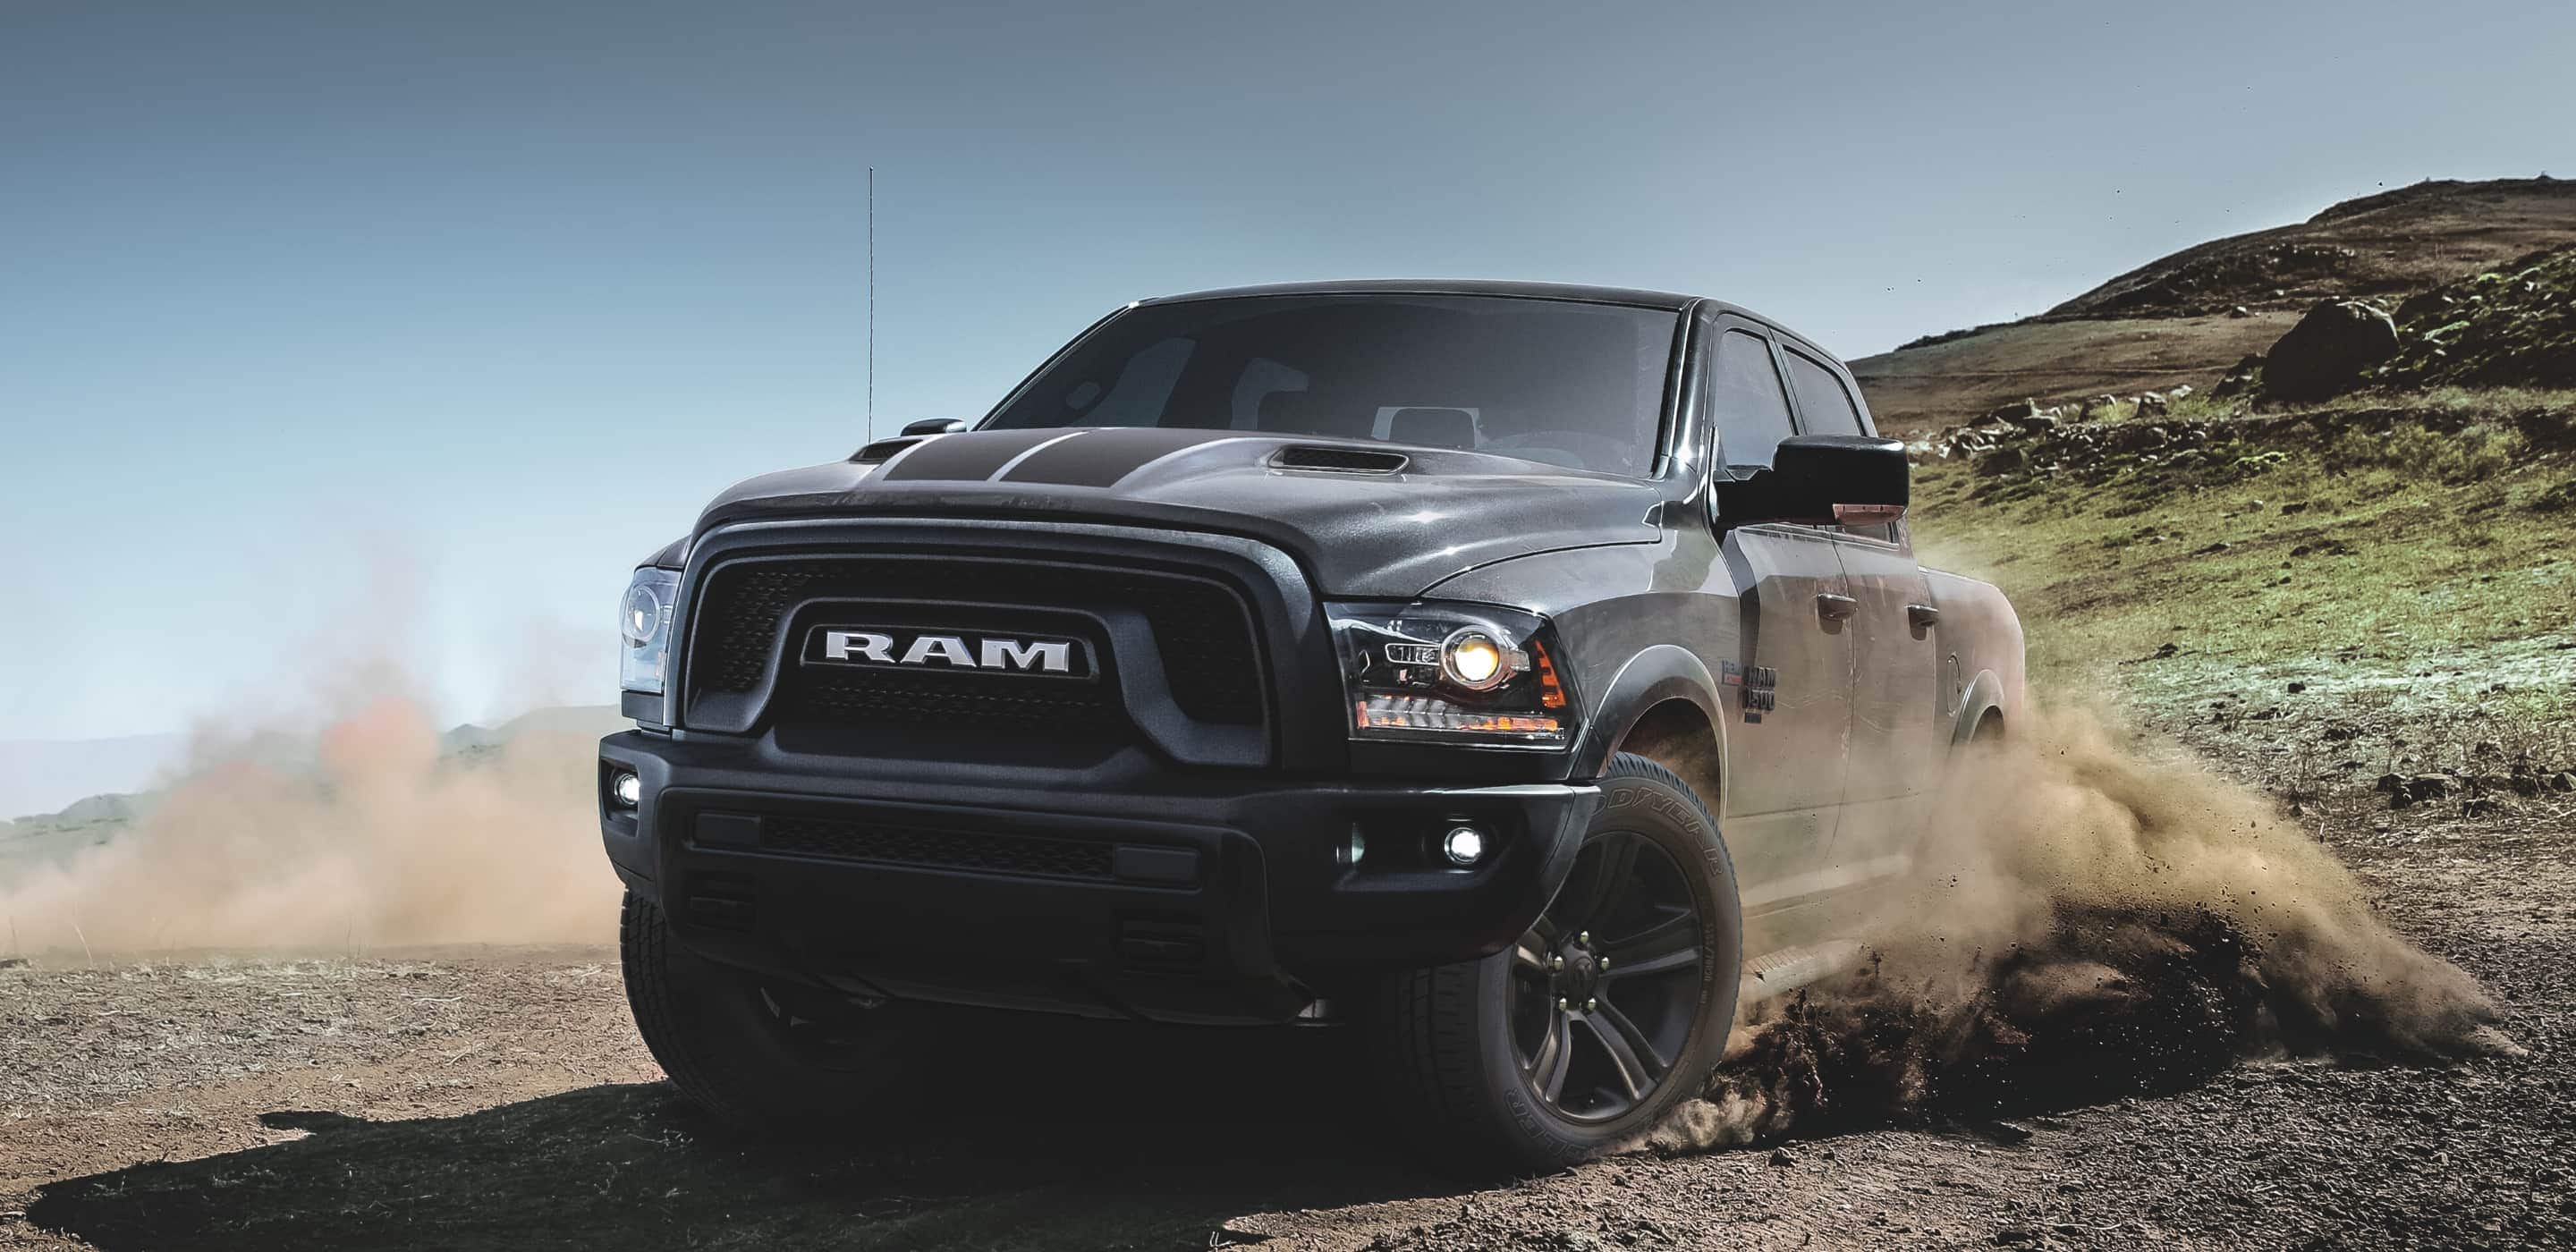 Display The 2022 Ram 1500 Classic throwing up dirt from its wheels as it's driven off-road.